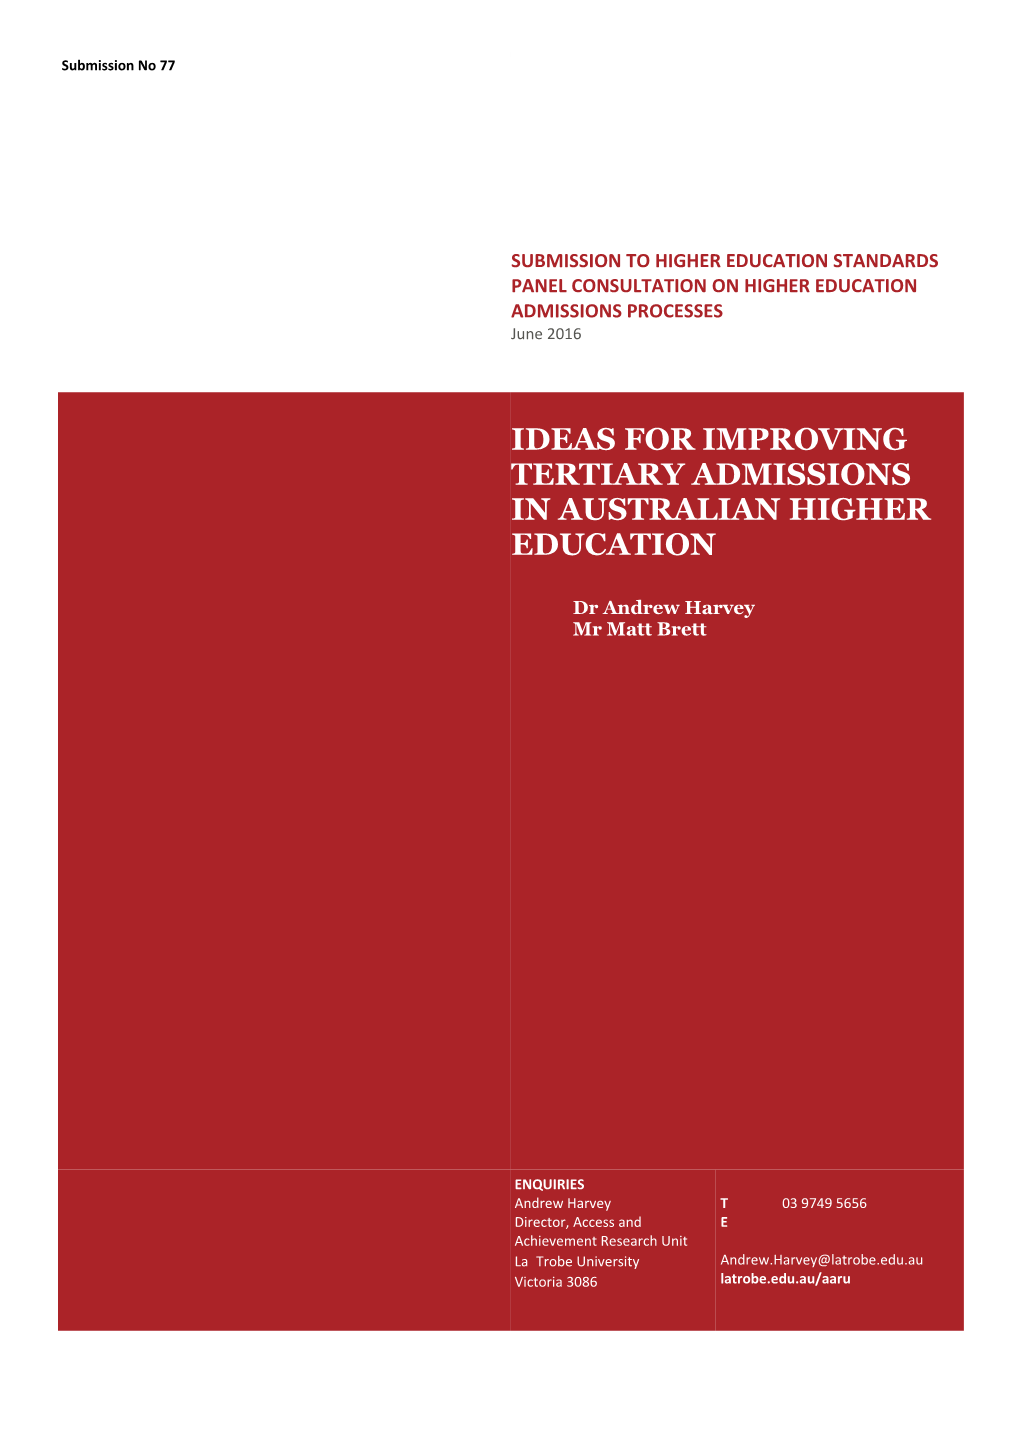 Ideas for Improving Tertiary Admissions in Australian Higher Education